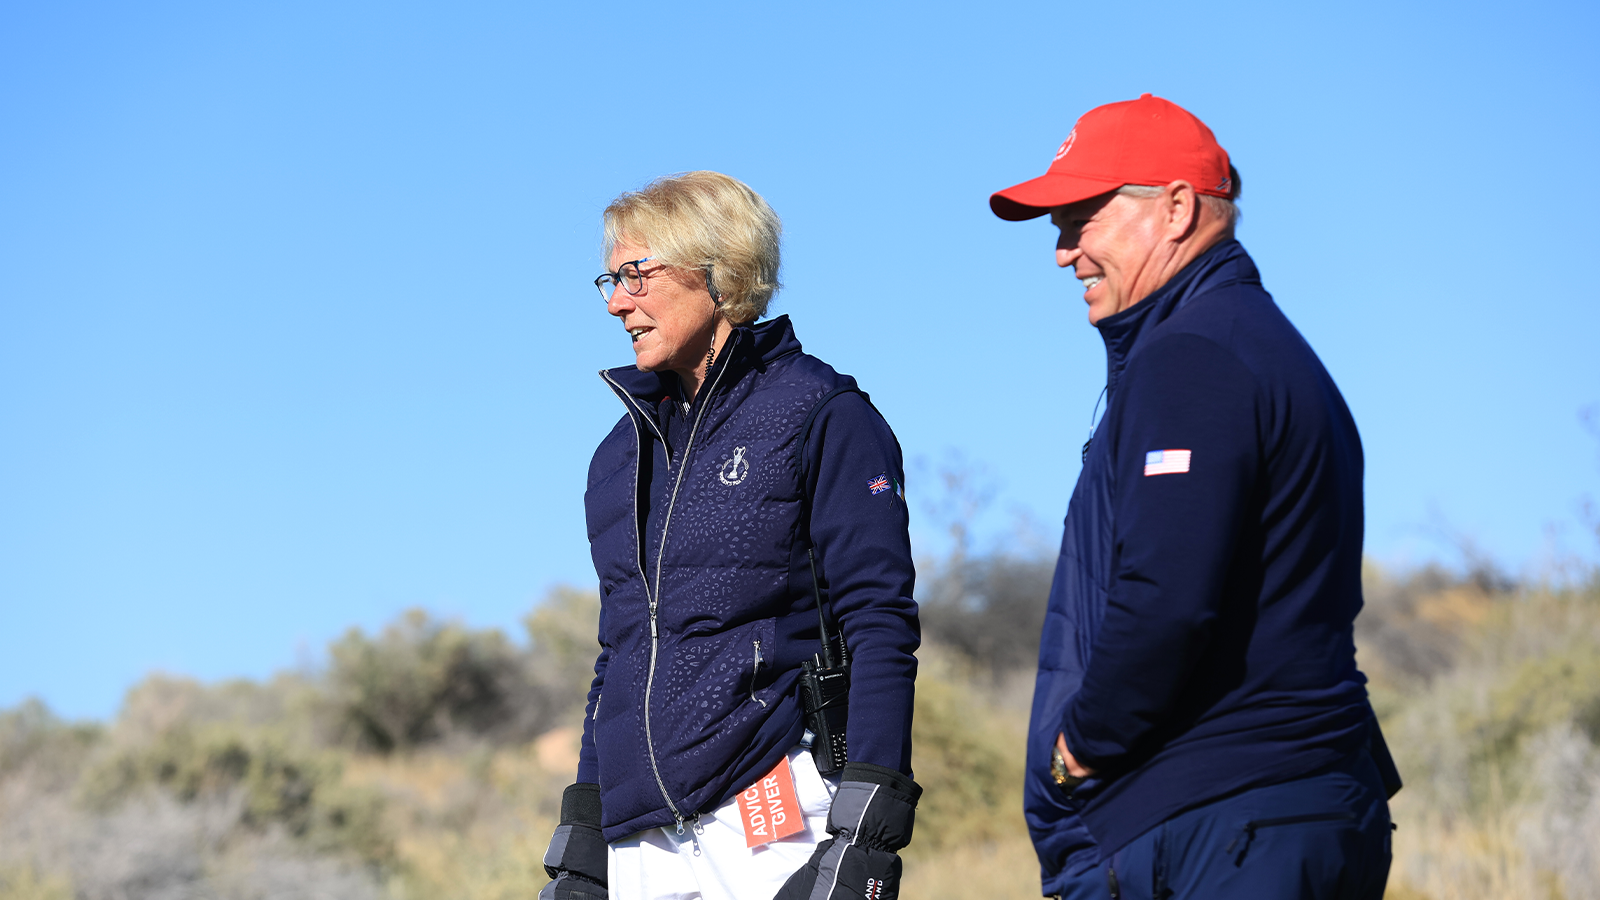 Team Captains Sarah Bennett of Team Great Britain & Ireland and PGA of America President Jim Richerson of the U.S. Team during the final round of the 2nd Women's PGA Cup at Twin Warriors Golf Club on Saturday, October 29, 2022 in Santa Ana Pueblo, New Mexico. (Photo by Sam Greenwood/PGA of America)